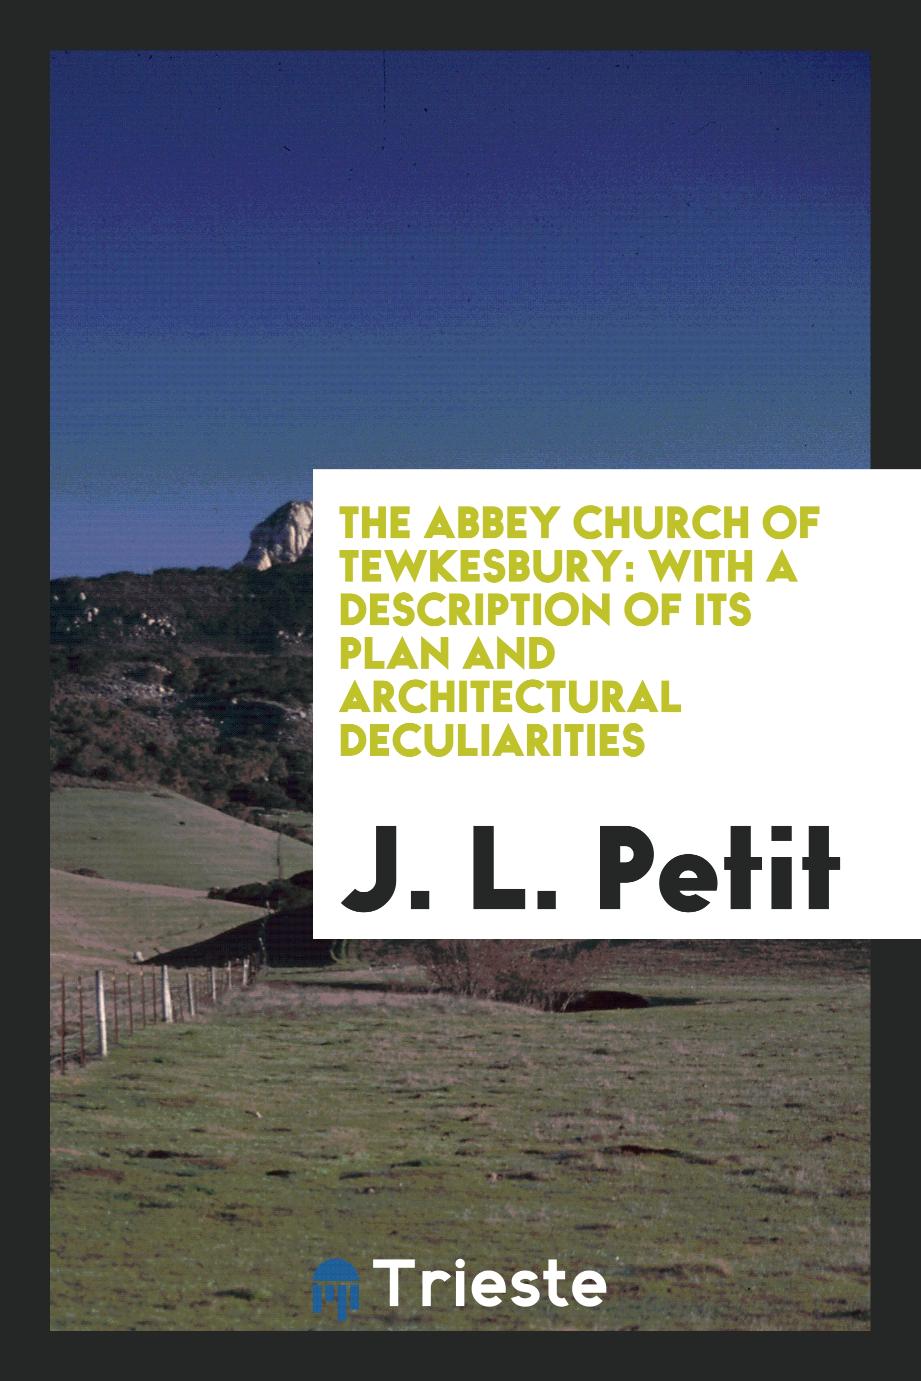 The abbey church of Tewkesbury: with a description of its plan and architectural Deculiarities